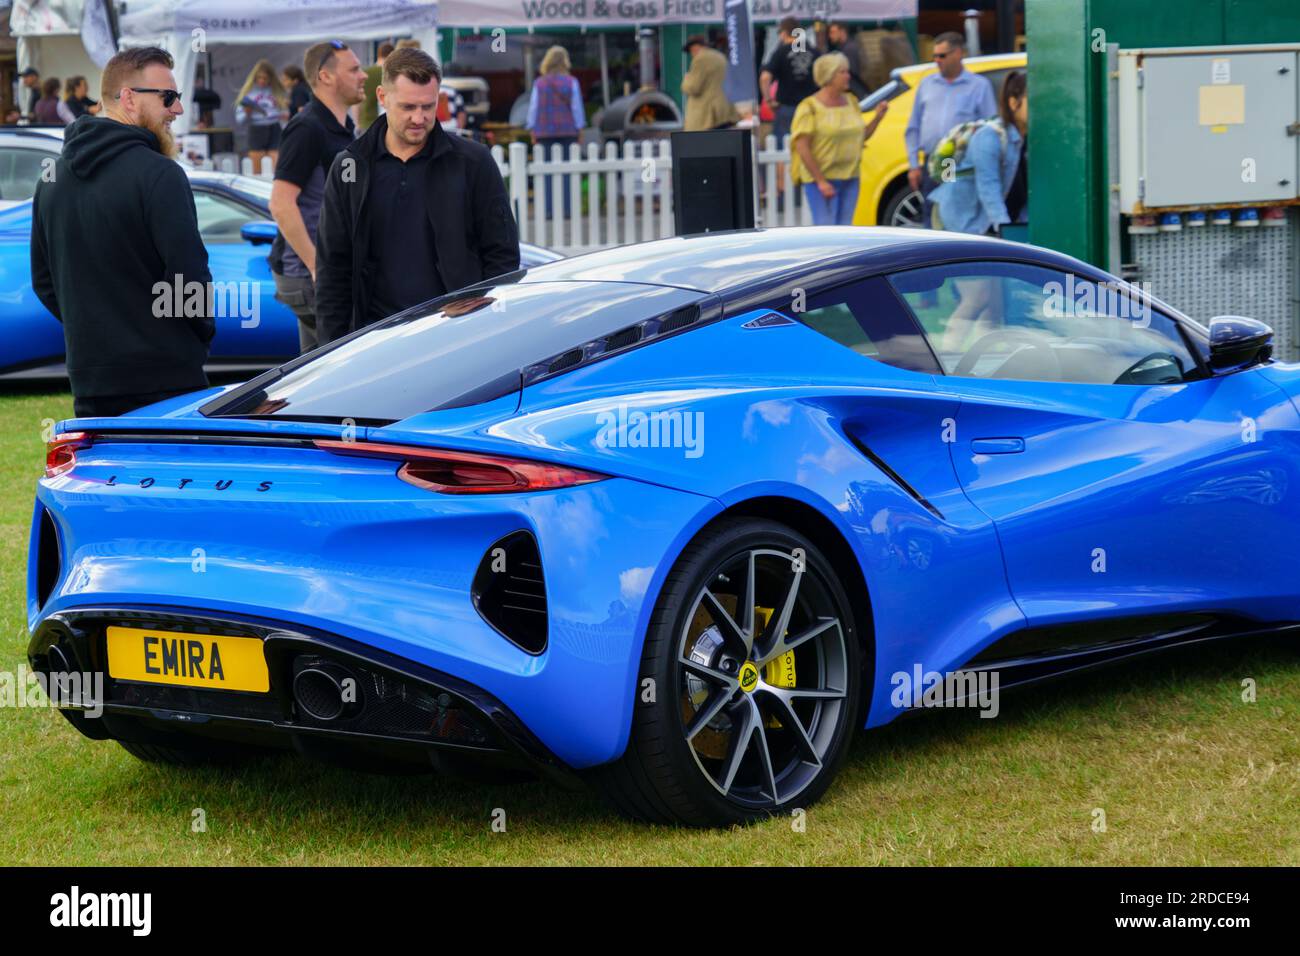 At the Yorkshire Show, there is a gleaming new blue Lotus Emira sportscar on exhibit, which catches the attention of two guys, Harrogate, UK. Stock Photo